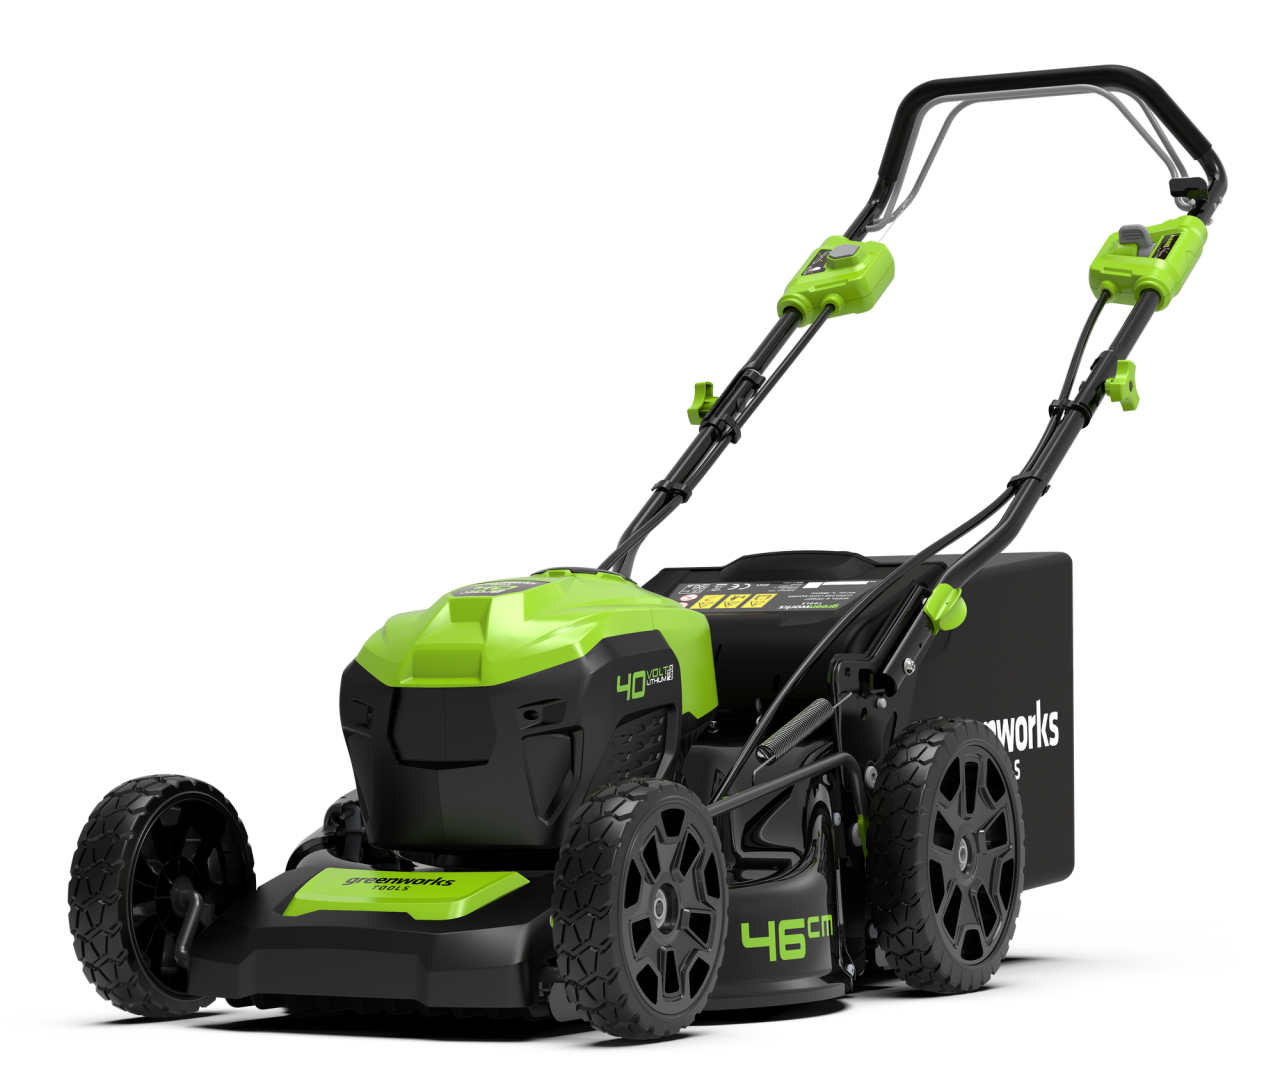 RASAERBA GREENWORKS TIPO GD40LM46SP